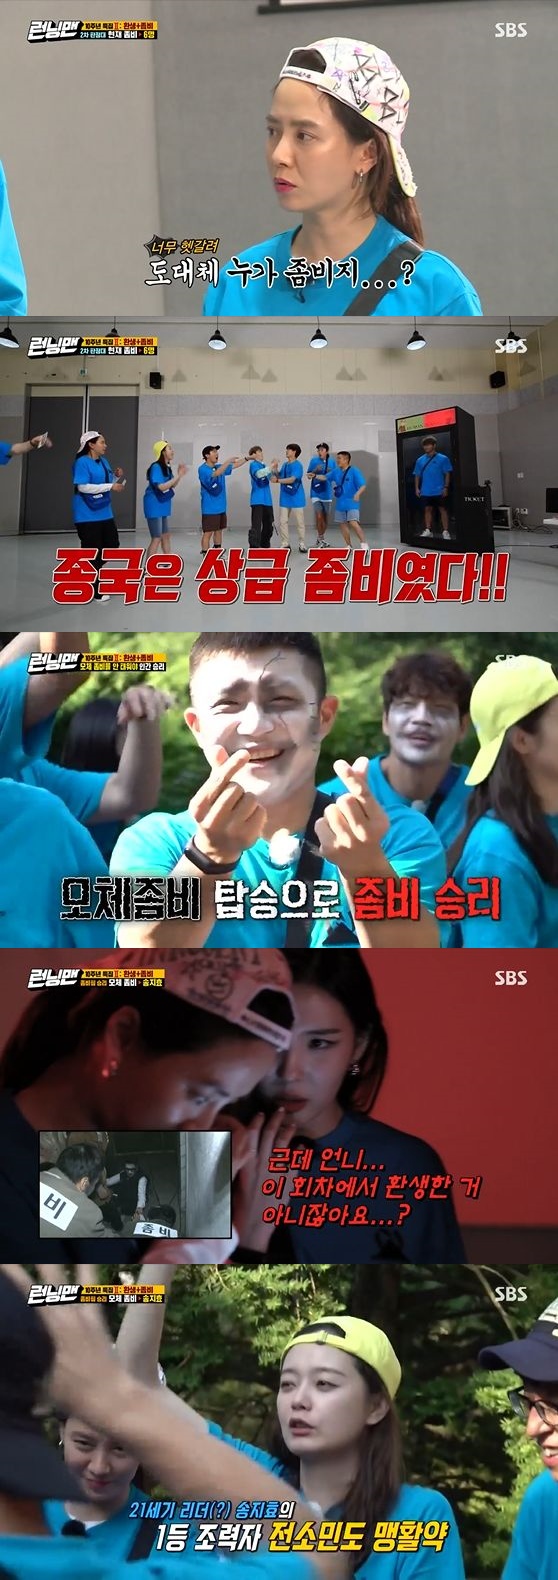 On the afternoon of the 5th, SBS Sunday entertainment Running Man featured a special race of Reincarnation + Zombie 2: The Dead are Among Us following last weeks superpower race.As a guest, Zico and Sunmi, who came back with the release of the new song, and Jo Se-ho and Lee Do-hyun, who came to the slim figure after the diet, came together.Race unfolded as Zombie 2: The Dead are Among Us vs. Humans, and again searching for a special presence, adding to the members breathtaking chase and thrill.Sunmis Polaroid photo, which was taken every move, became a hint, leading to Races peak and finding a hidden handwriting hint due to Zicos performance.Then, at 4:00 pm, an ambulance came and Zico and Yoo Jae-Suk burned Song Ji-hyo except for Jeon So-min, but eventually the reversal was unfolded with the victory of Zombie 2: The Dead are Among Us team.Mother Zombie 2: The Identity of The Dead are Among Us turned out to be Song Ji-hyo and Jeon So-min played as Senior Zombie 2: The Dead are Among Us to help him.Song Ji-hyos performance was noticed as a cheerful revenge while all the members were surprised at Race, which added a reversal to the reversal.On the other hand, Zico and Sunmi announced their new song stage and predicted the occupation of the summer chart.Zico performed the stage of the new song Summer Hate and showed a witty fan dance following the No Song Challenge dance which was the topic before.Sunmi danced to the new song Vorite Night beat, sparking anticipation for a good-will showdown with Zico.